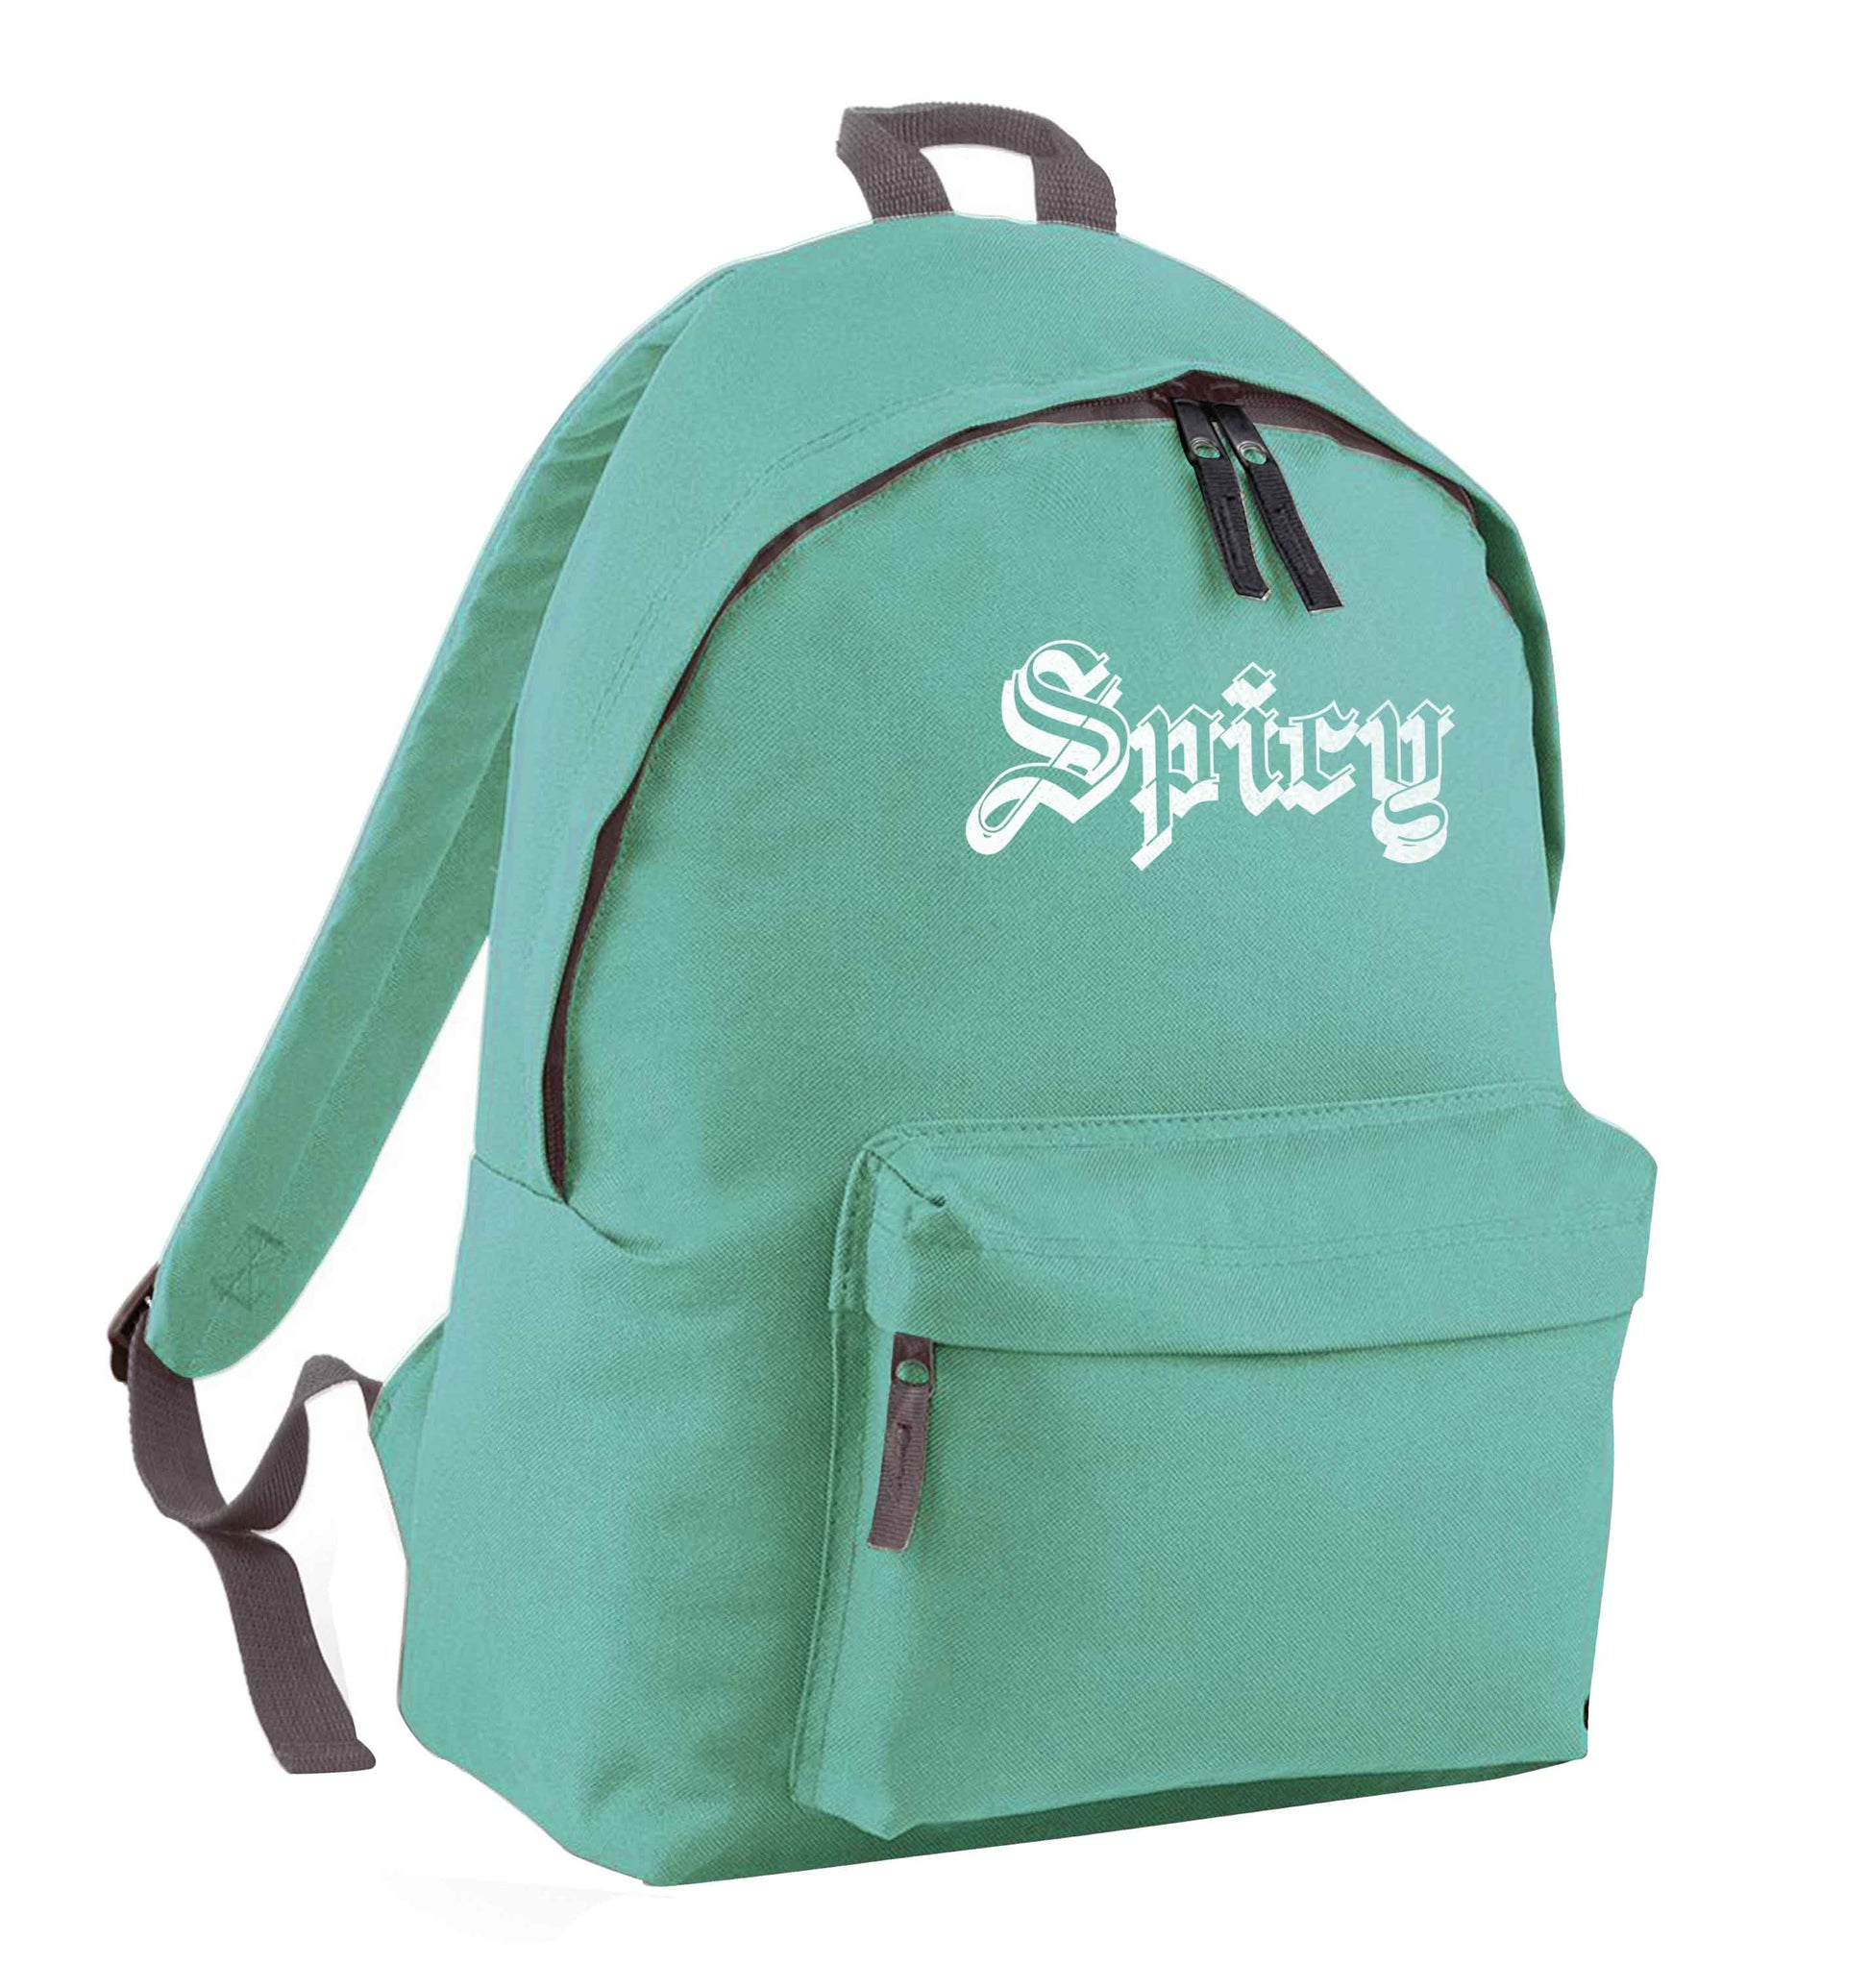 Spicy mint adults backpack